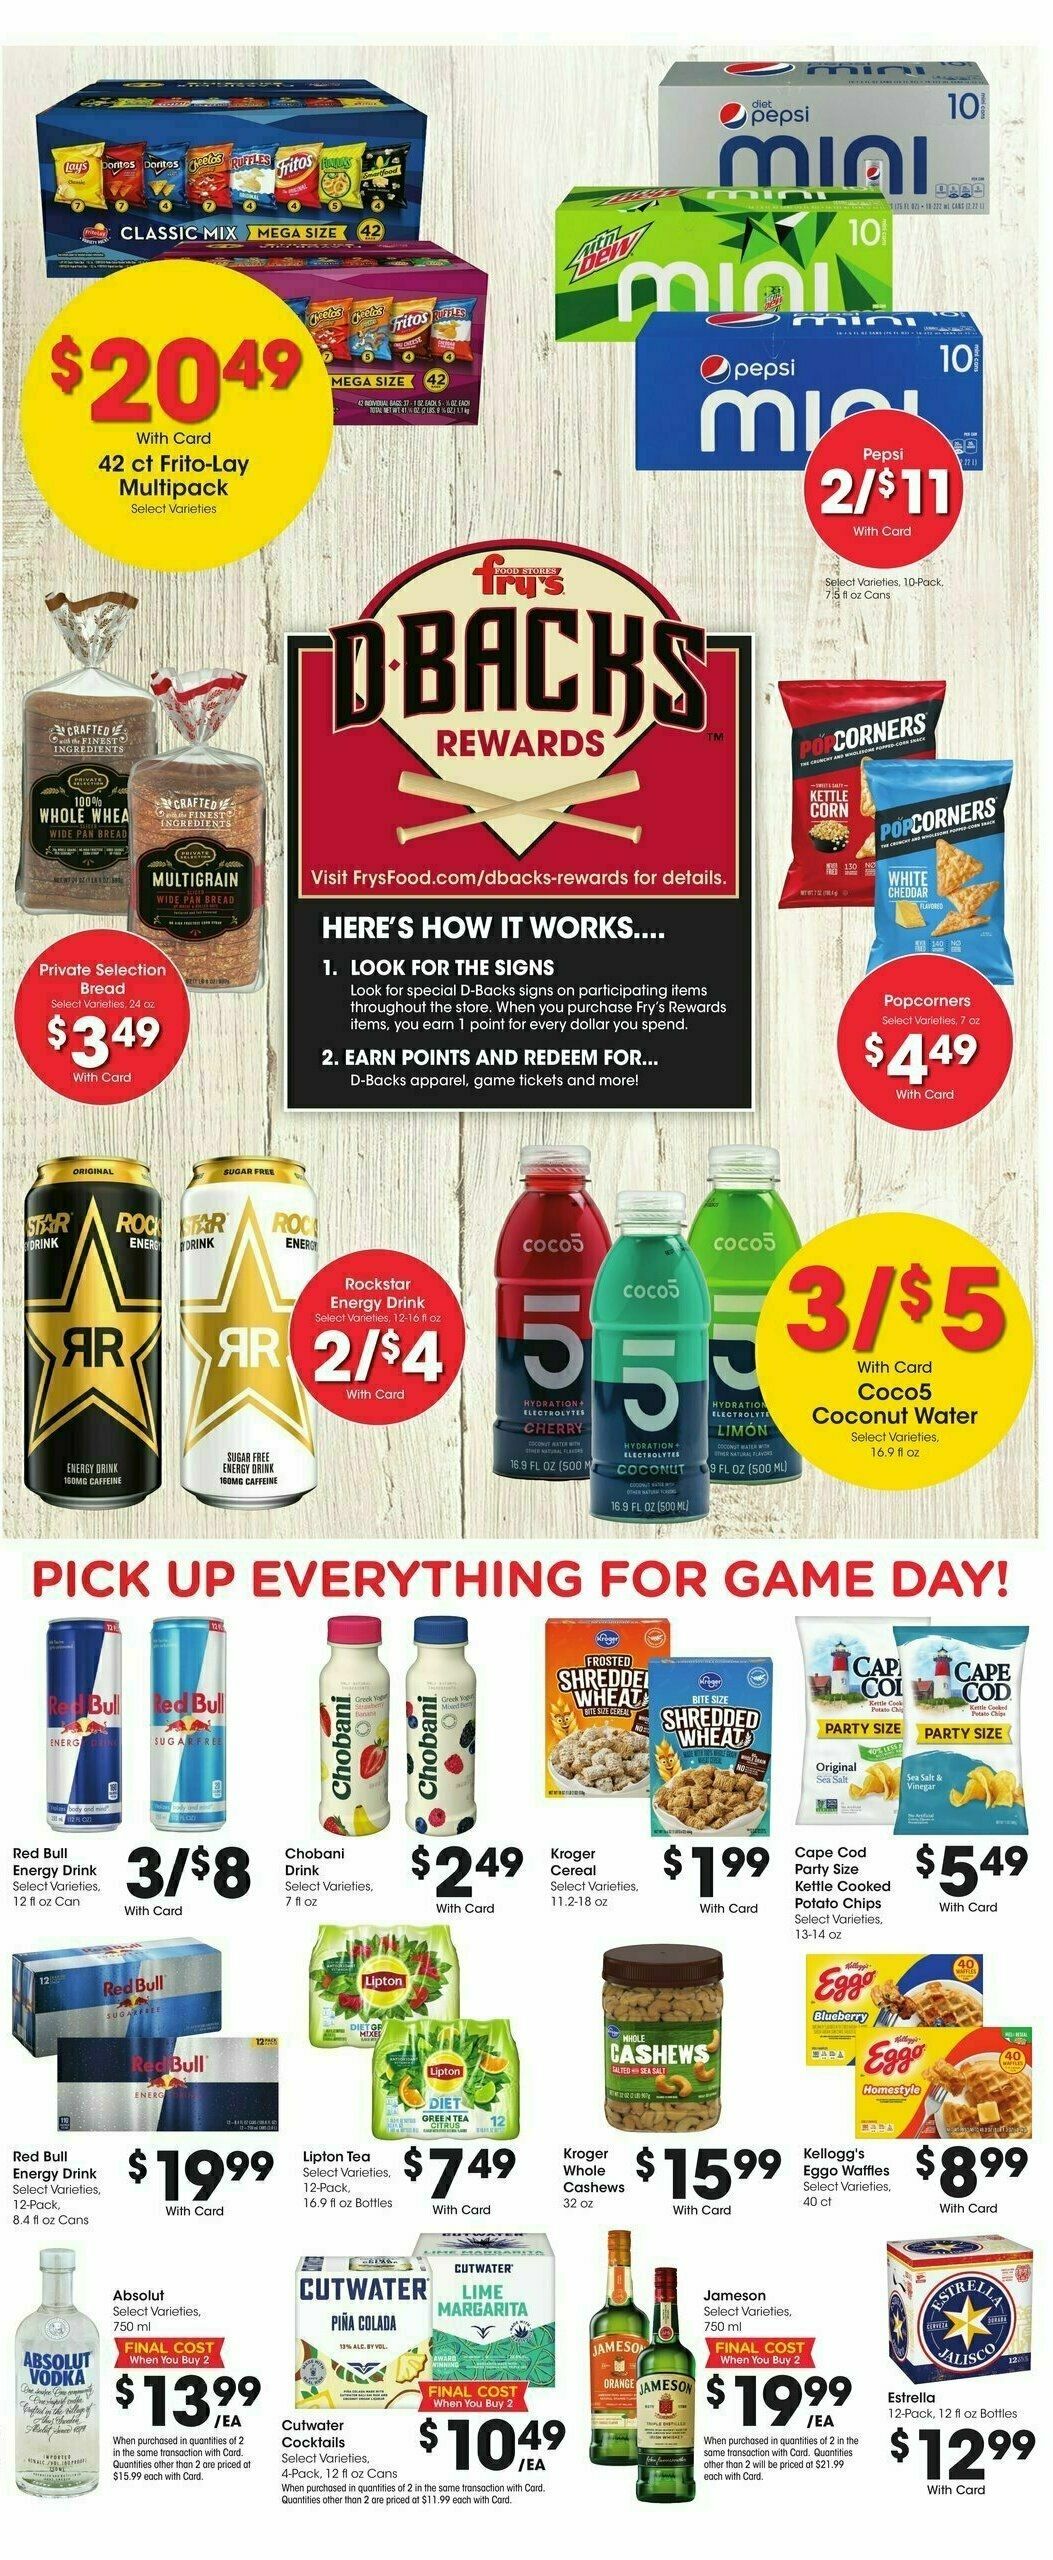 Fry's Food Weekly Ad from August 2